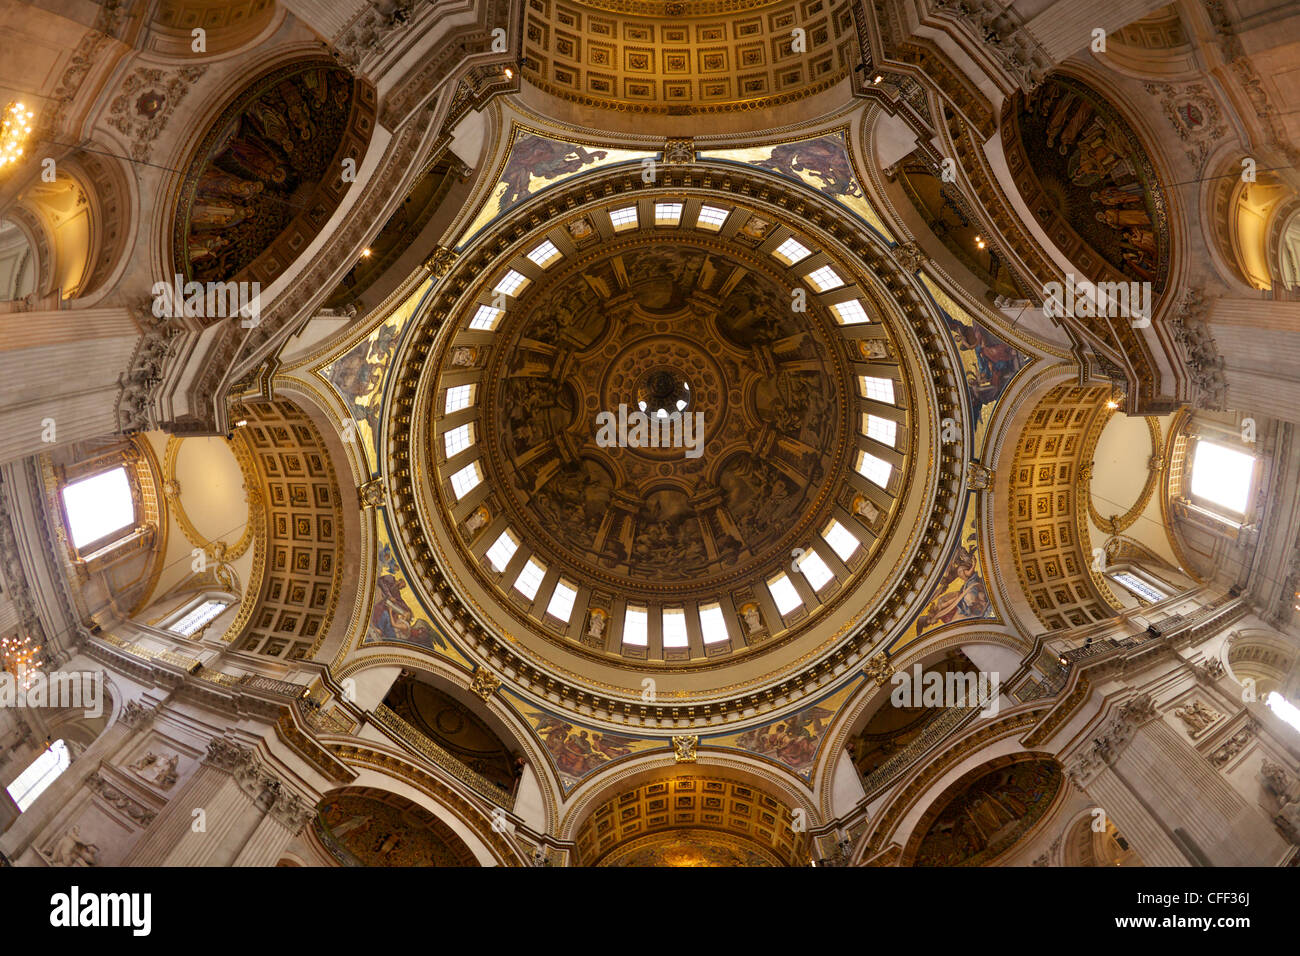 Interior of the dome of St Paul's Cathedral, London, England, UK, United Kingdom, GB, Great Britain, British Isles, Europe Stock Photo